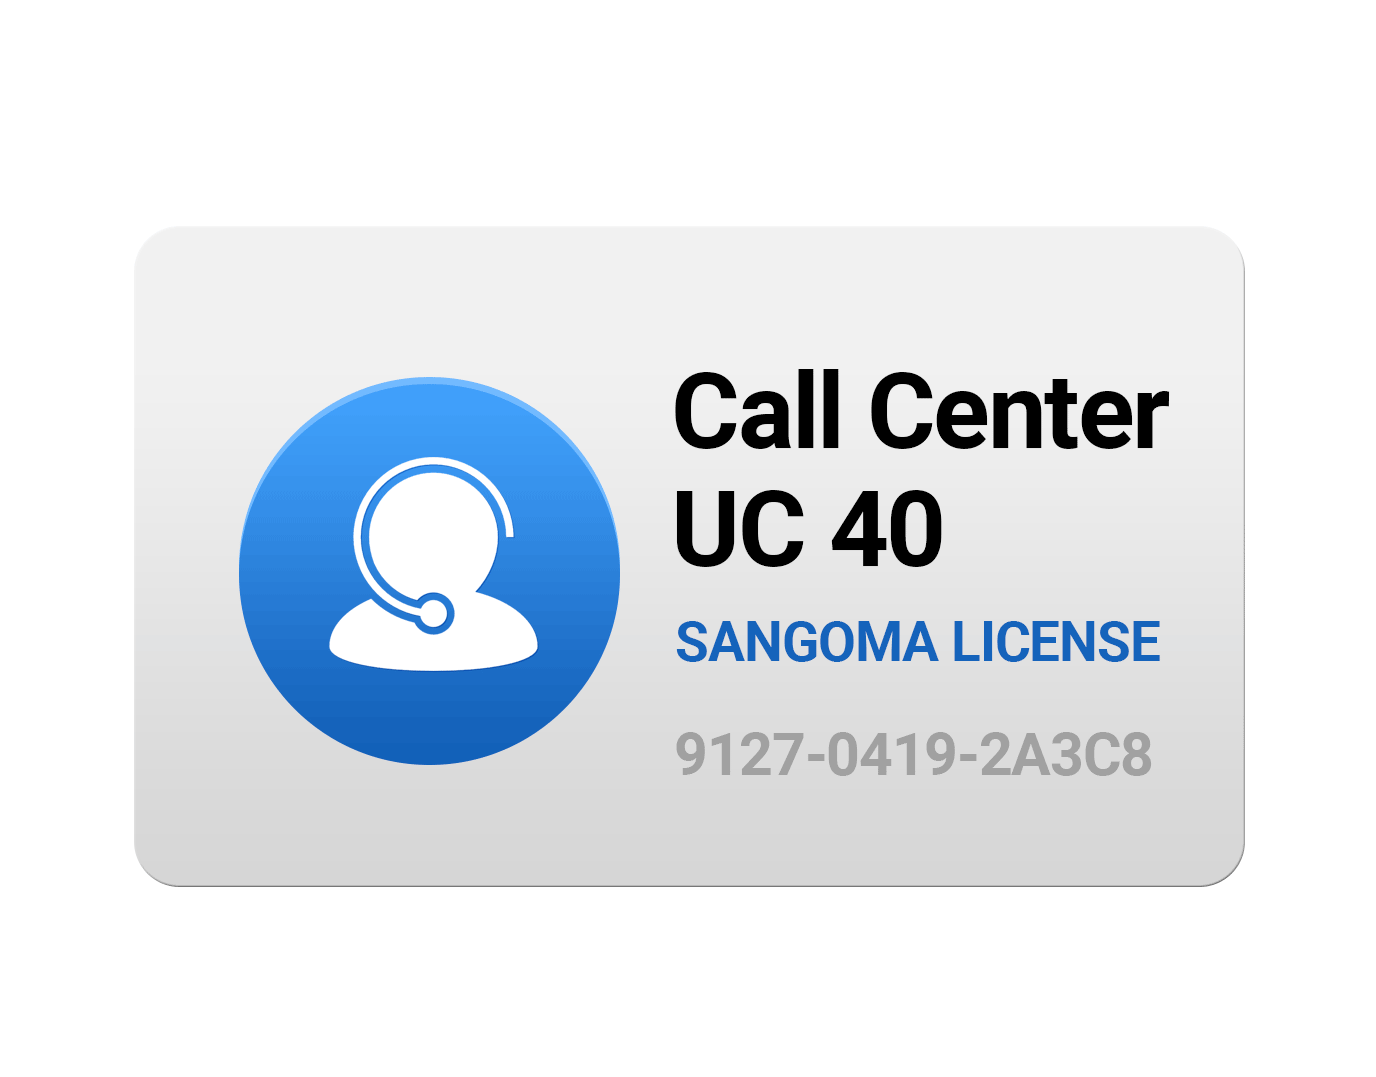 Call Center Features License for UC 40